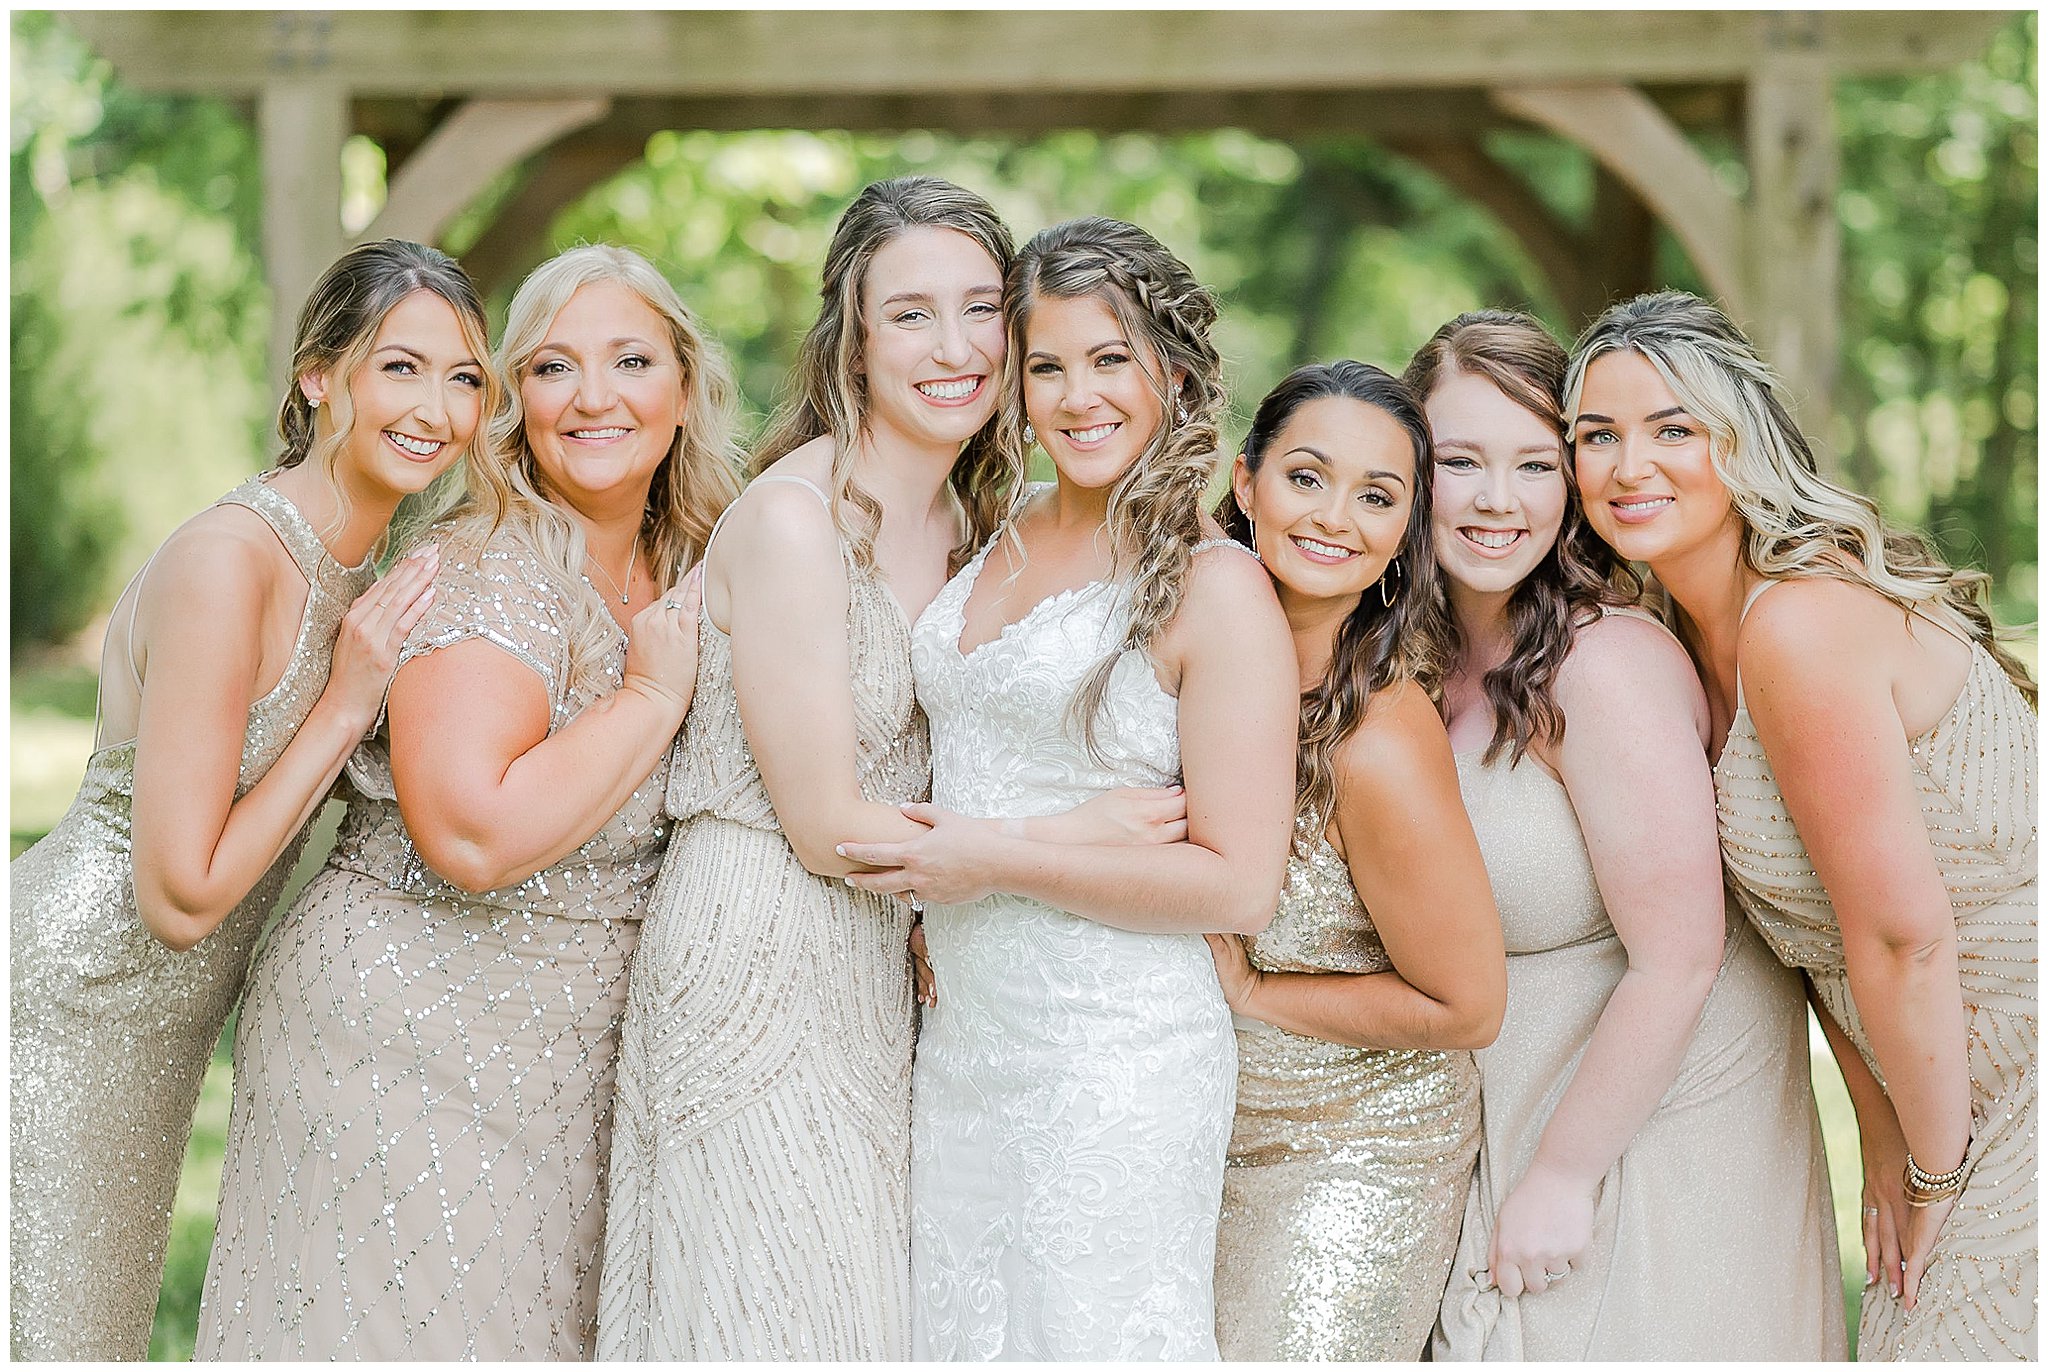 Historic Ashland Wedding | Historic Ashland Wedding Photographer | Wrightsville PA | Wrightsville PA Wedding | Wrightsville PA Wedding Venue | Bridal party Photos | Bridal Party poses